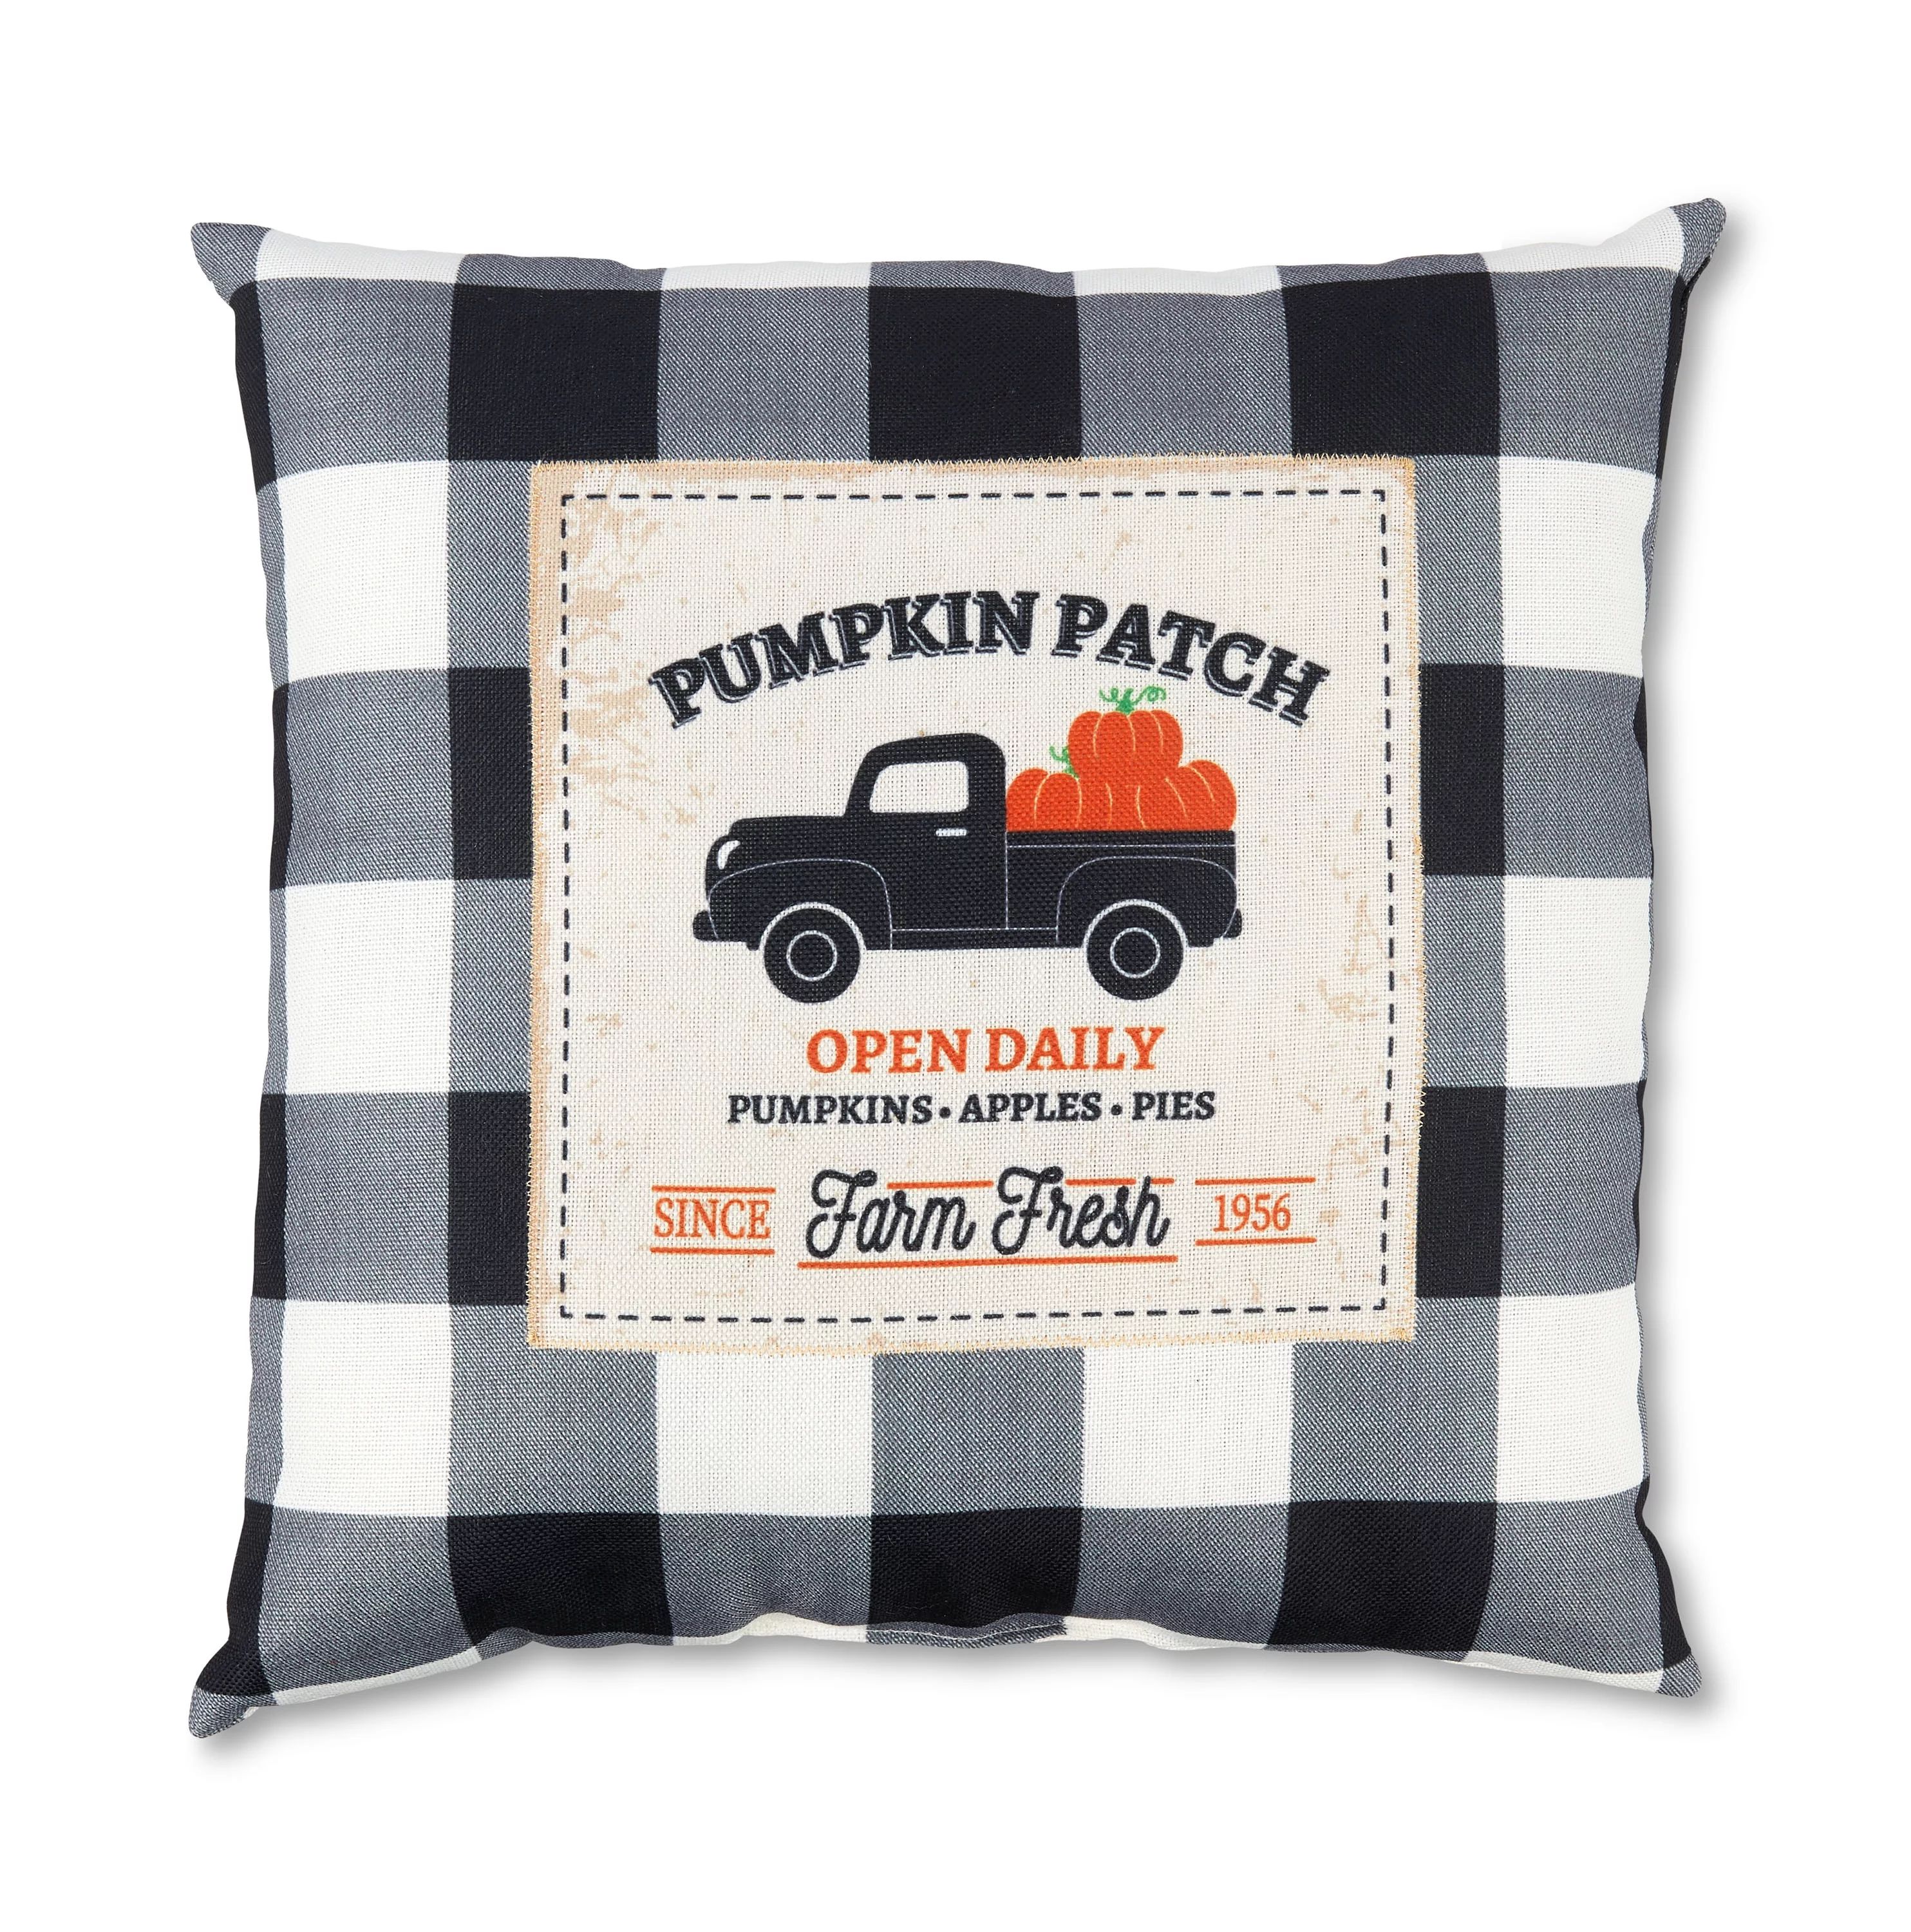 Fall, Harvest 13 in Black and White Pumpkin Patch Decorative Pillow, Way to Celebrate! | Walmart (US)